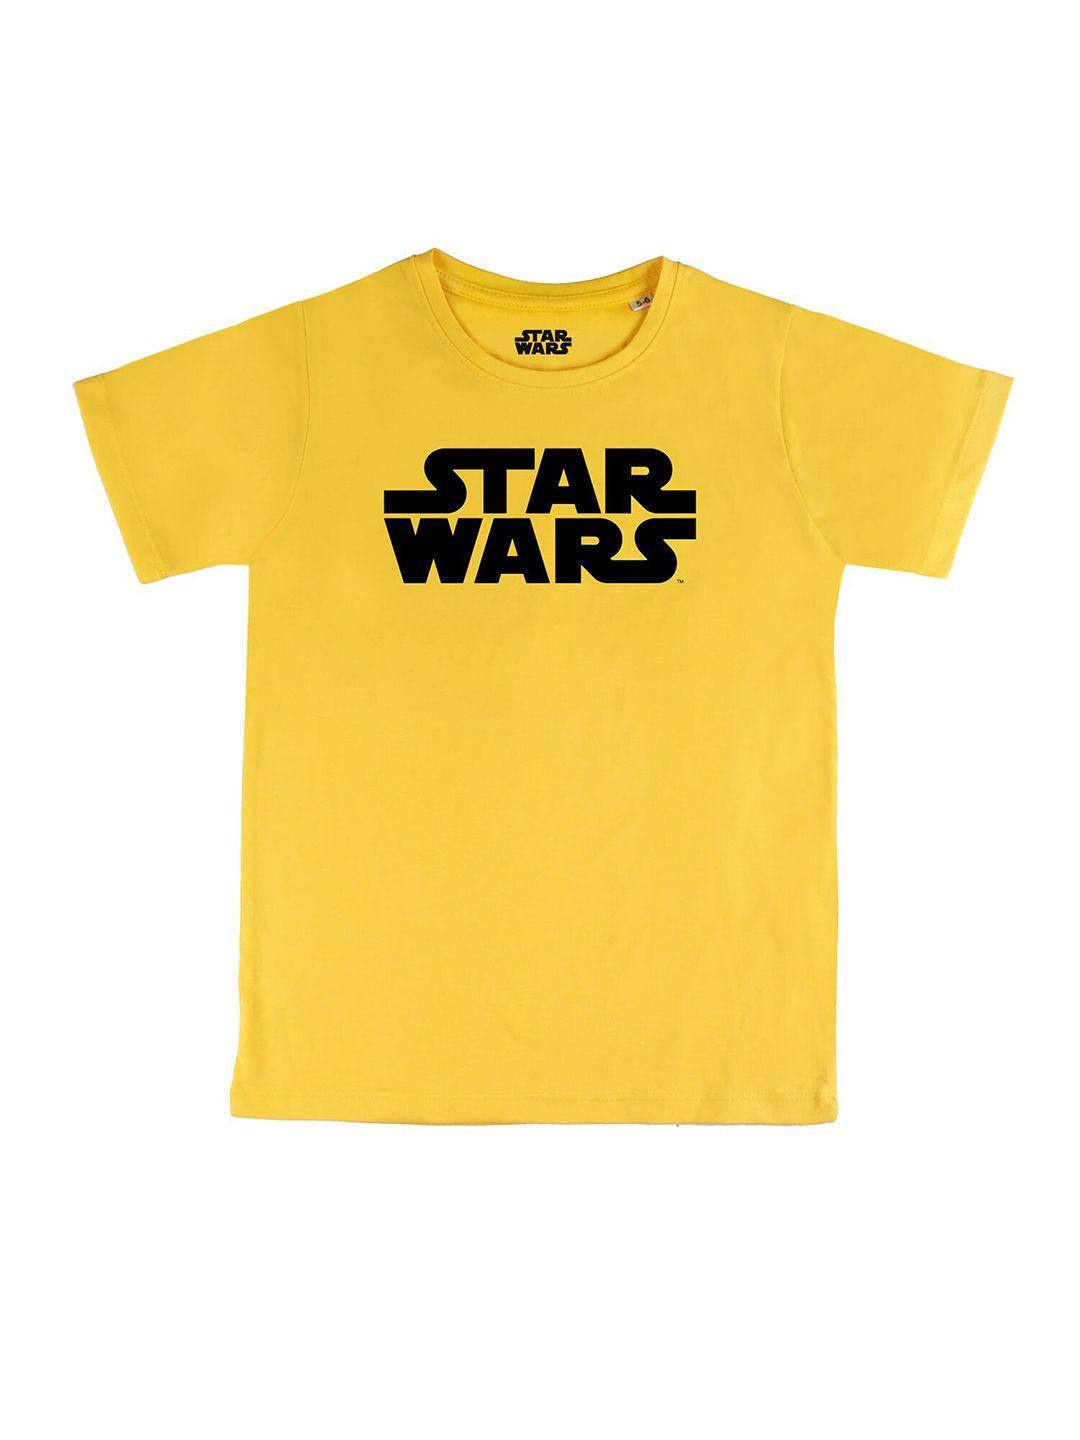 star-wars-by-wear-your-mind-boys-yellow-star-wars-printed-t-shirt